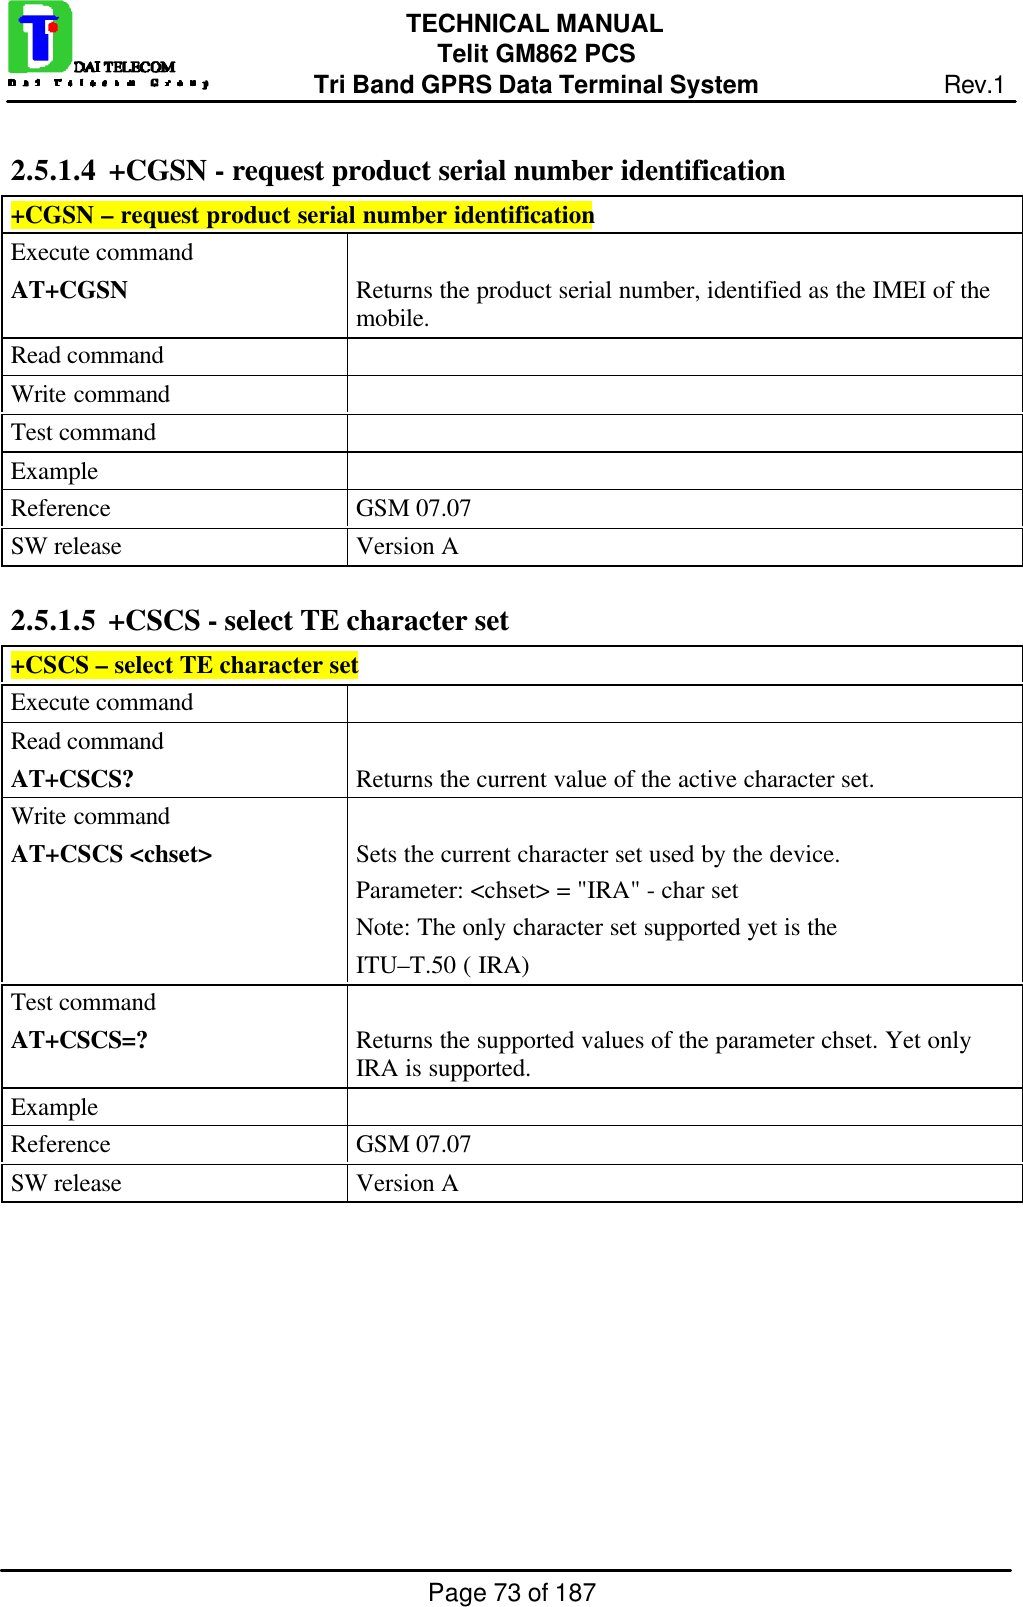 Page 73 of 187TECHNICAL MANUALTelit GM862 PCSTri Band GPRS Data Terminal System Rev.12.5.1.4  +CGSN - request product serial number identification+CGSN – request product serial number identificationExecute commandAT+CGSN Returns the product serial number, identified as the IMEI of themobile.Read commandWrite commandTest commandExampleReference GSM 07.07SW release Version A2.5.1.5  +CSCS - select TE character set+CSCS – select TE character setExecute commandRead commandAT+CSCS? Returns the current value of the active character set.Write commandAT+CSCS &lt;chset&gt; Sets the current character set used by the device.Parameter: &lt;chset&gt; = &quot;IRA&quot; - char setNote: The only character set supported yet is theITU–T.50 ( IRA)Test commandAT+CSCS=? Returns the supported values of the parameter chset. Yet onlyIRA is supported.ExampleReference GSM 07.07SW release Version A